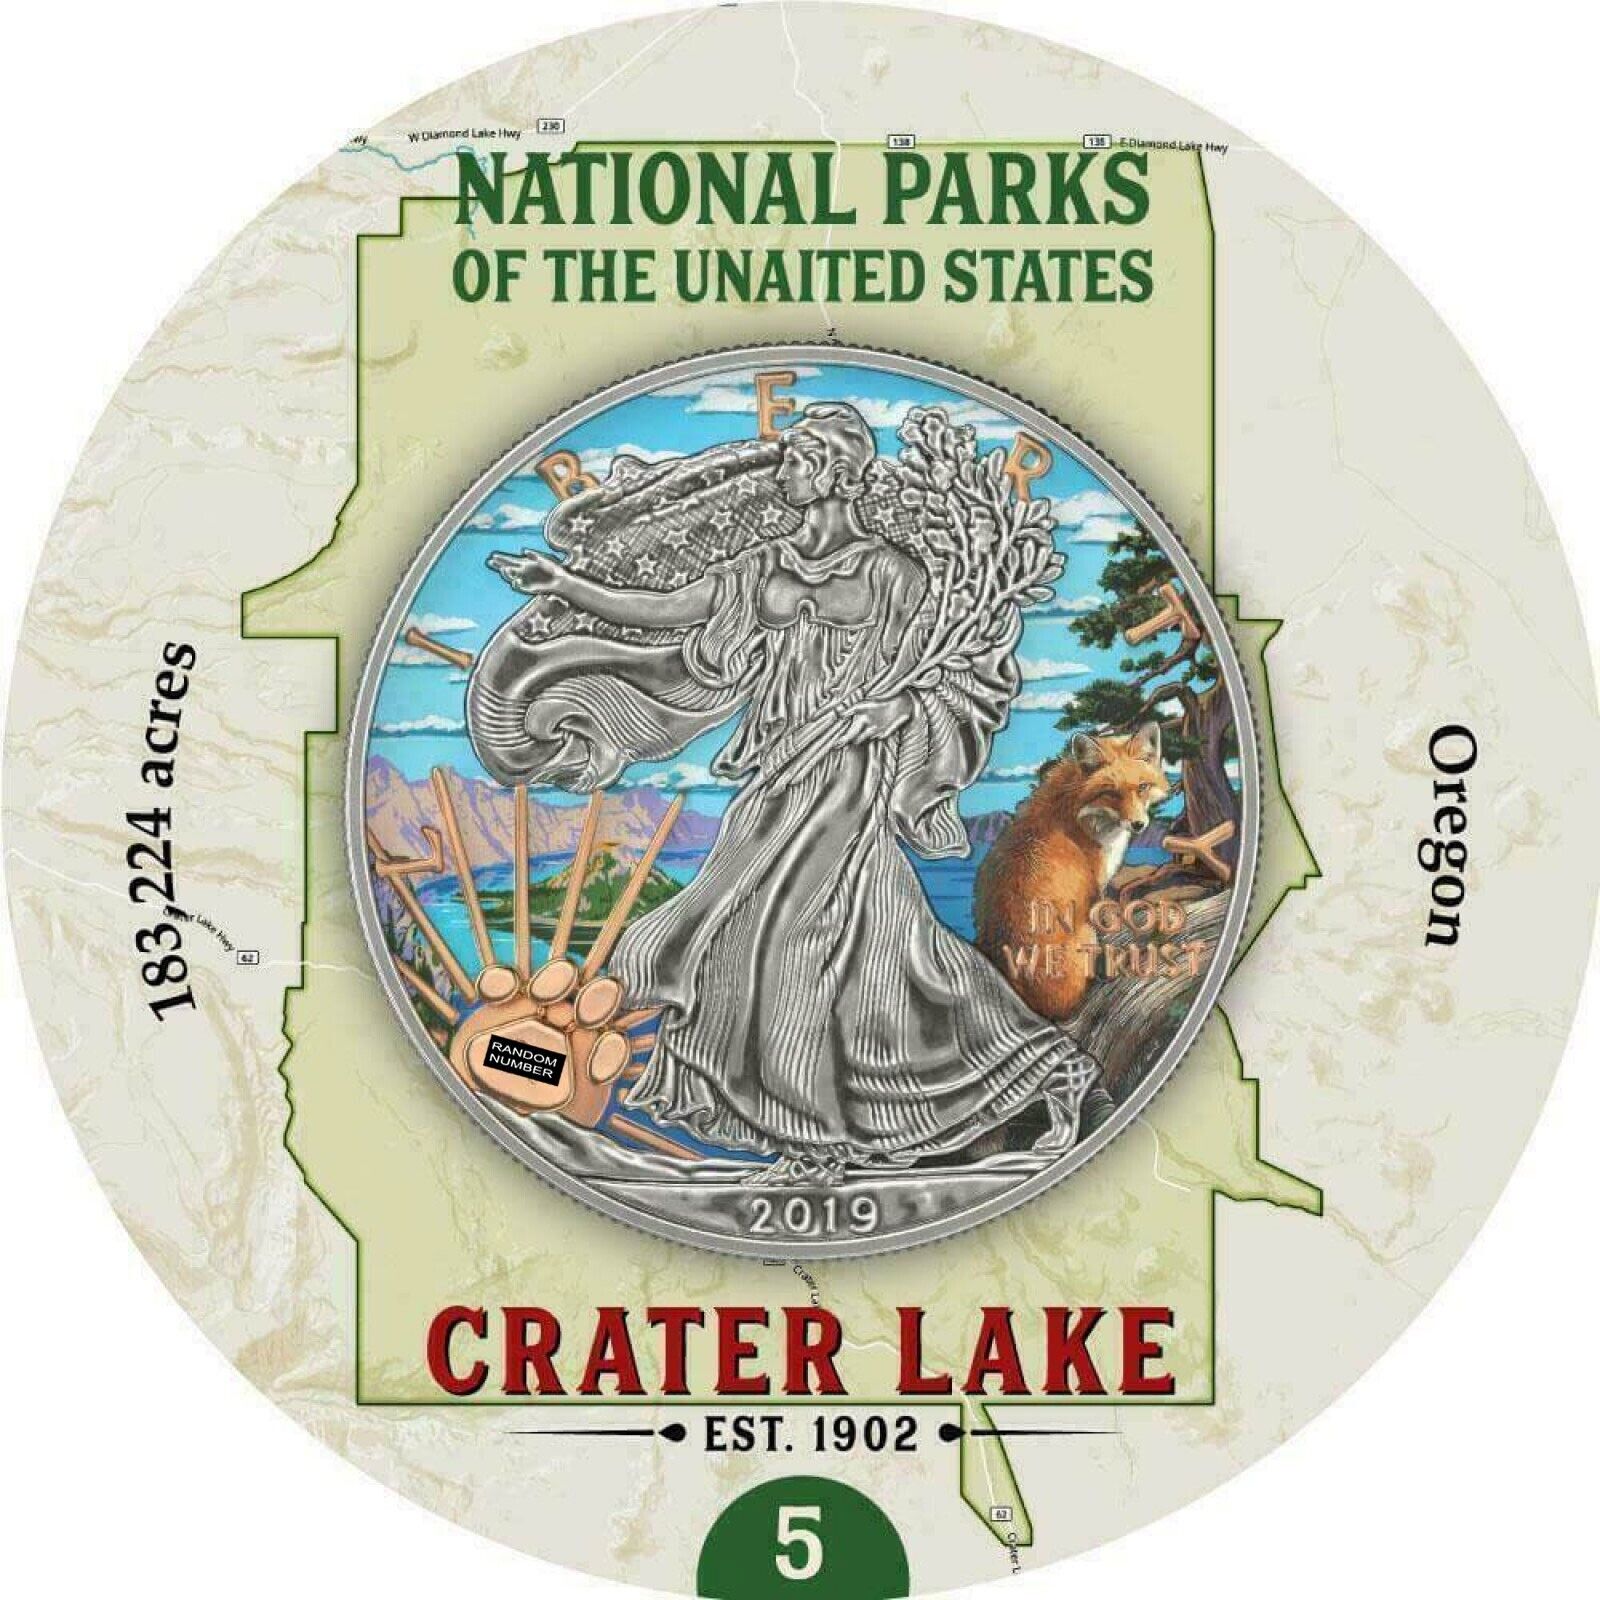 1 Oz Silver Coin 2019 $1 Liberty National Parks of The United States Crater Lake-classypw.com-6